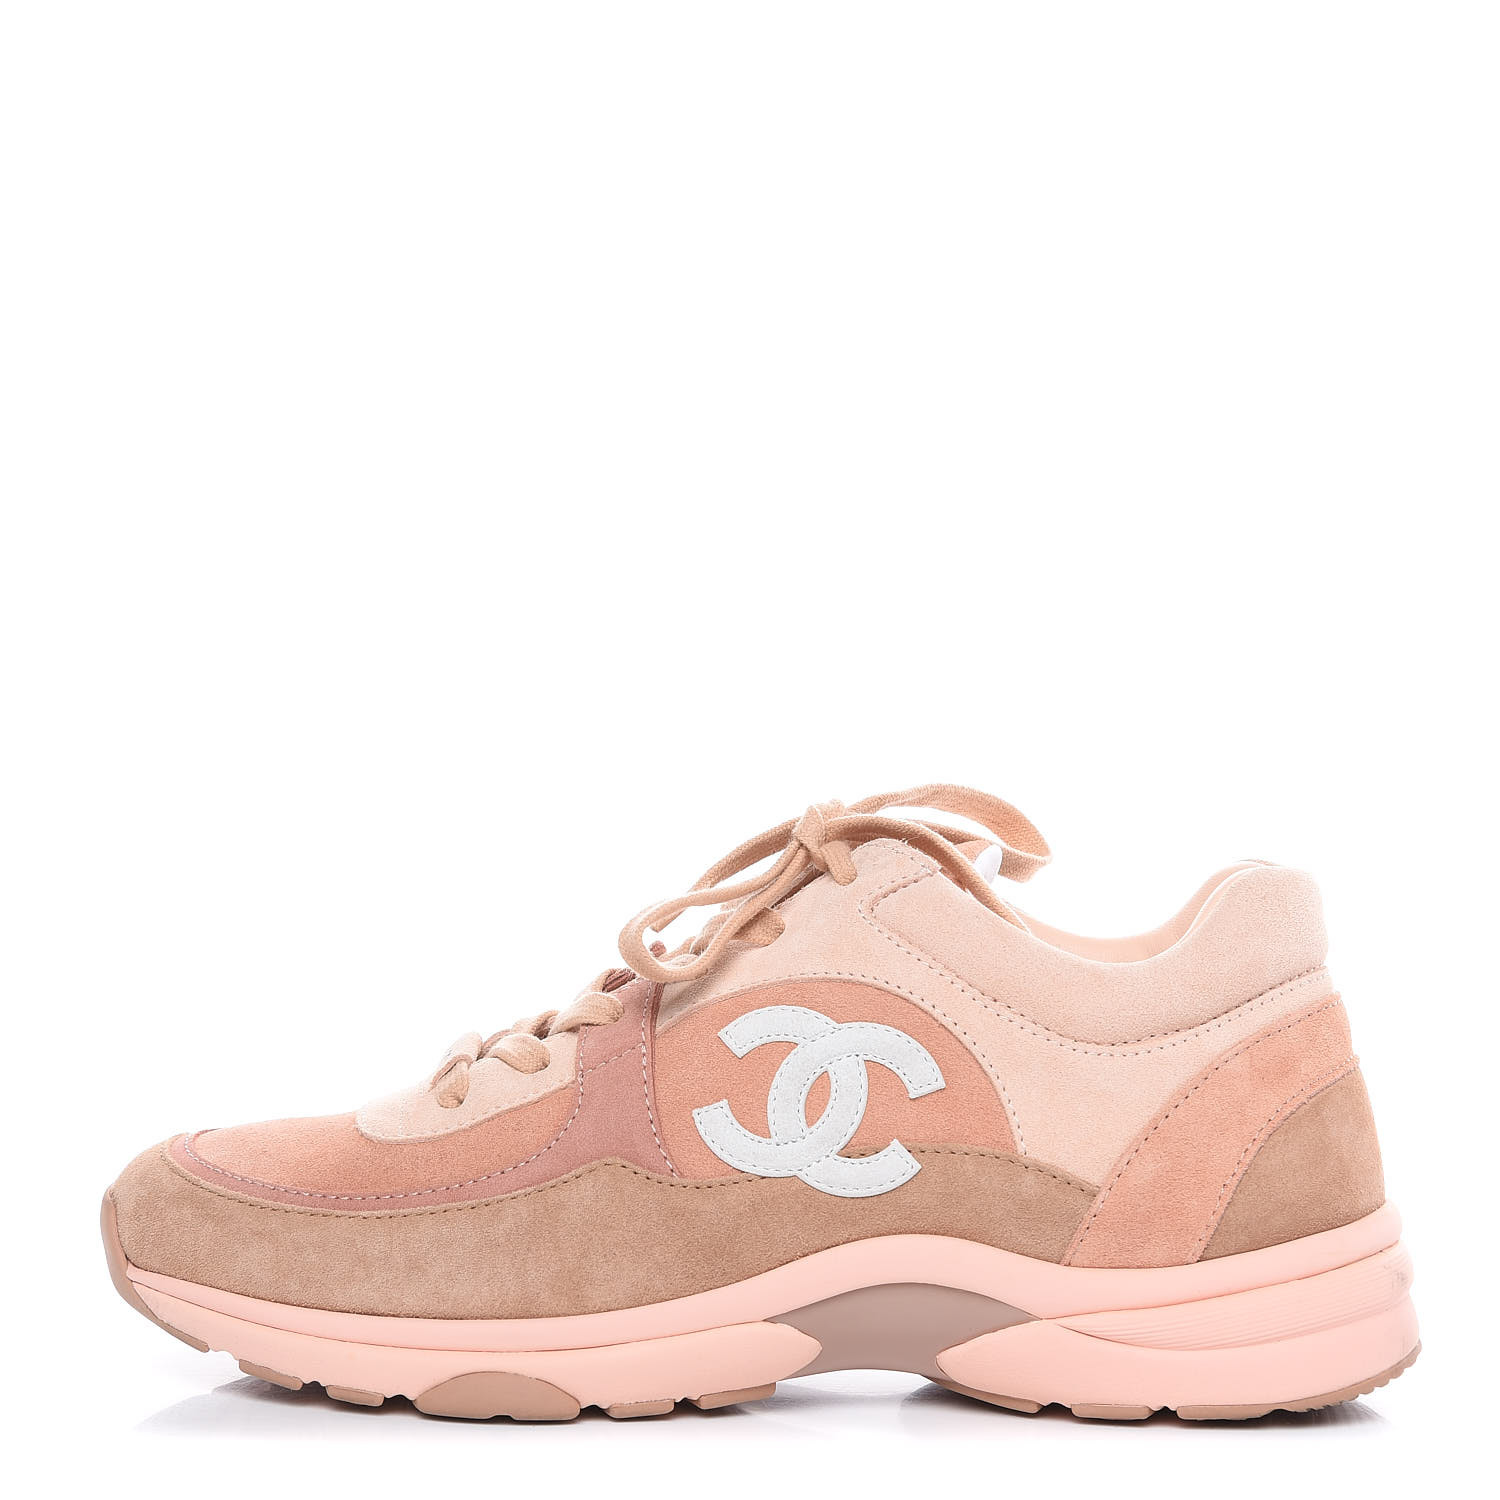 sneakers chanel pink